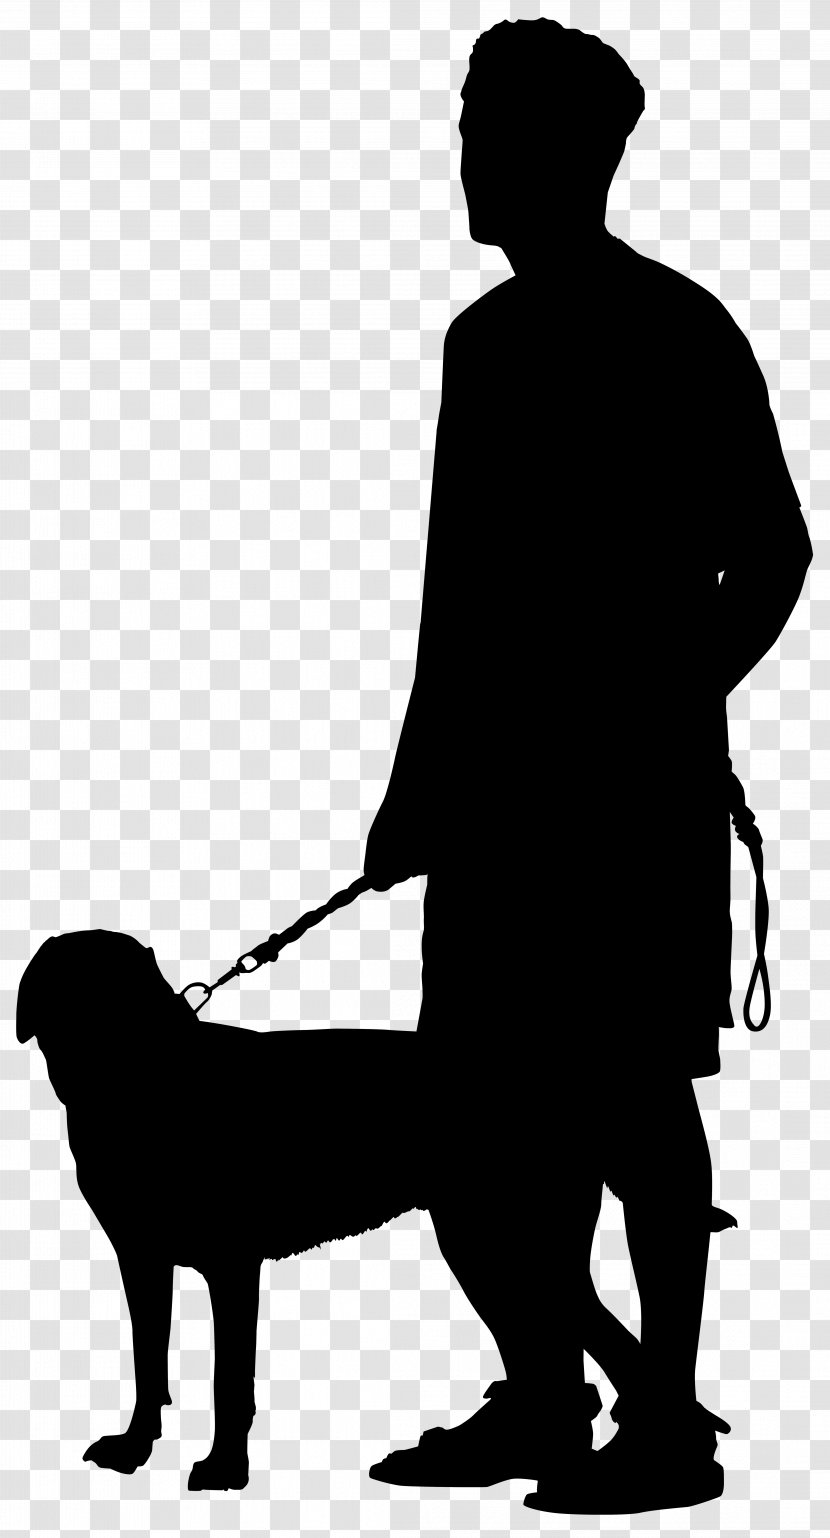 Dog Walking Silhouette Clip Art - Canidae - Man With Transparent Image Transparent PNG